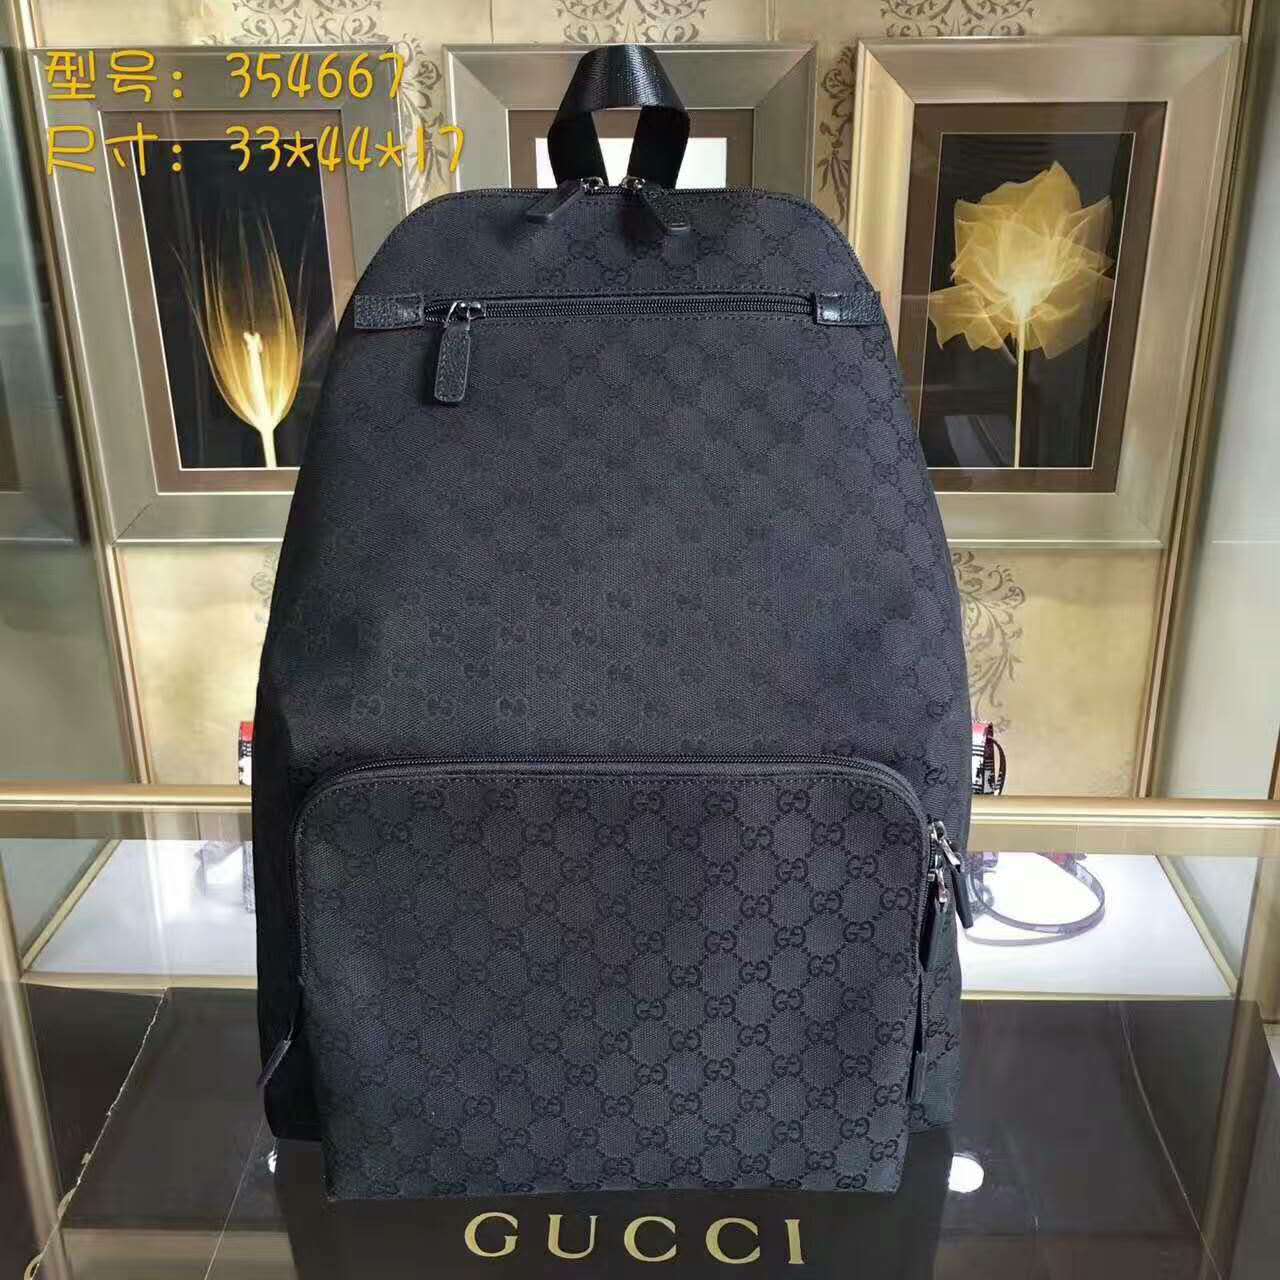 GUCCI 偽物グッチ バッグ 新作 リュックサック 大容量 両肩バッグ 354667